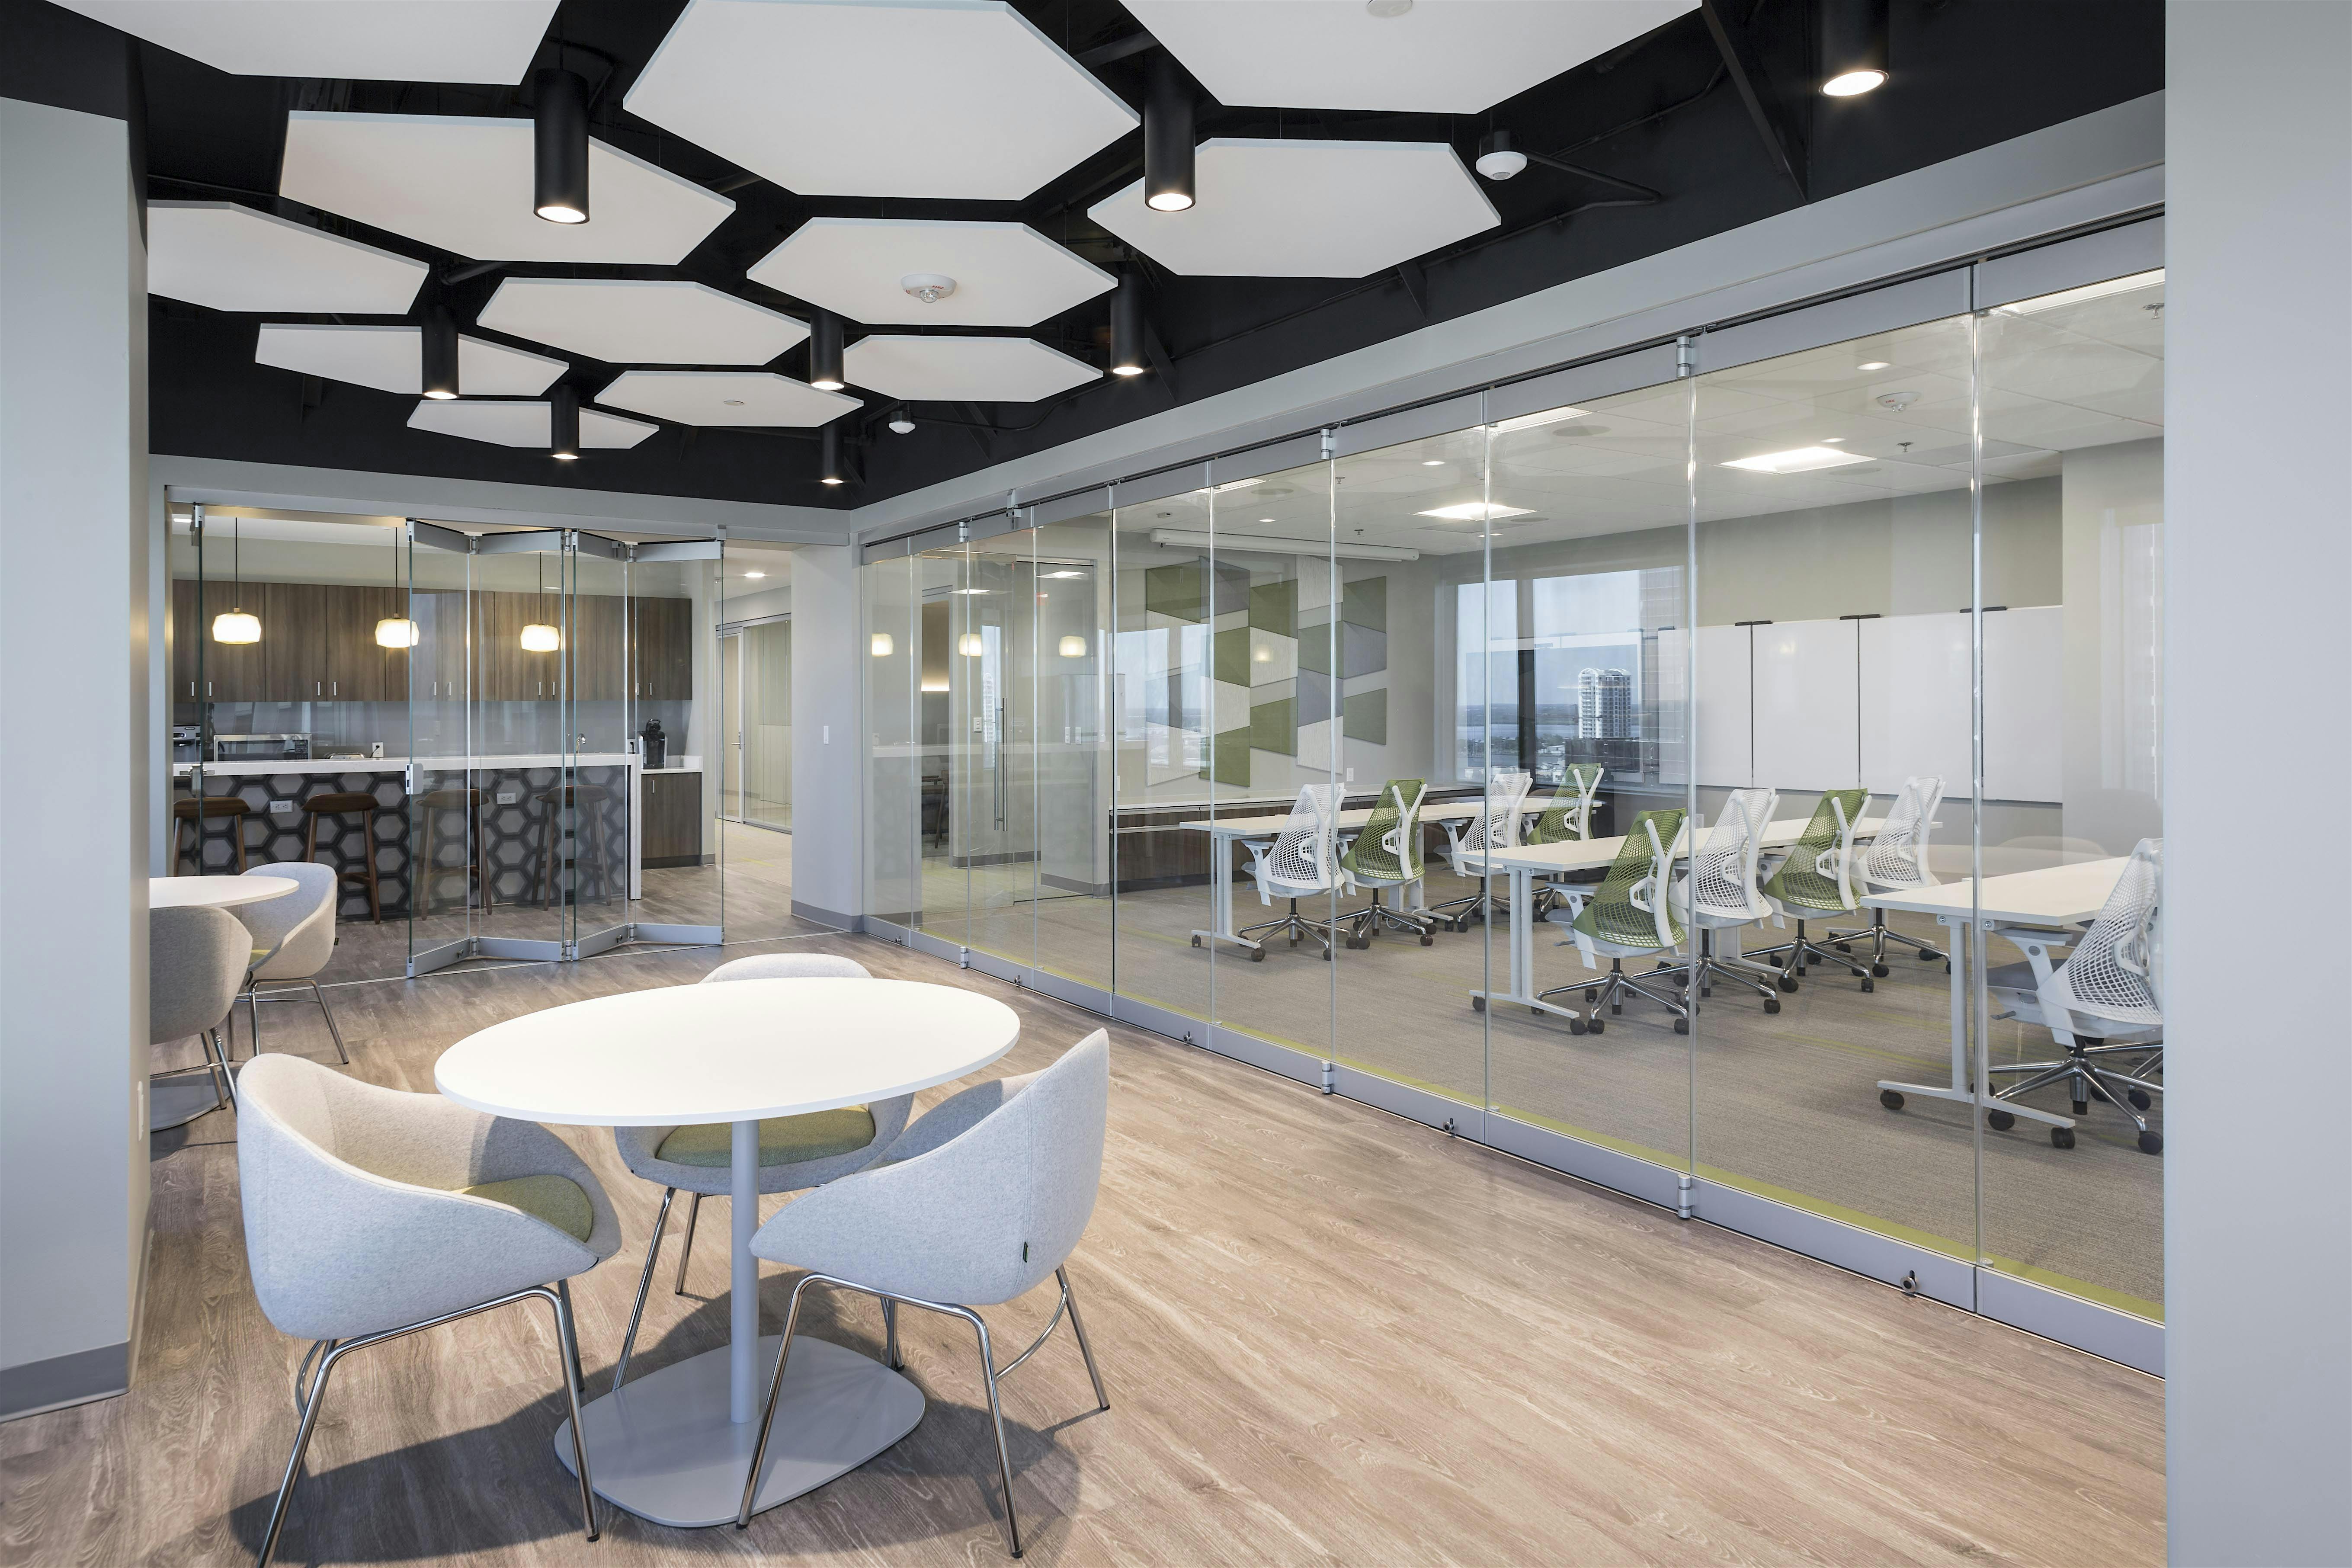 NanaWall Folding glass doors in space-efficient workplace design